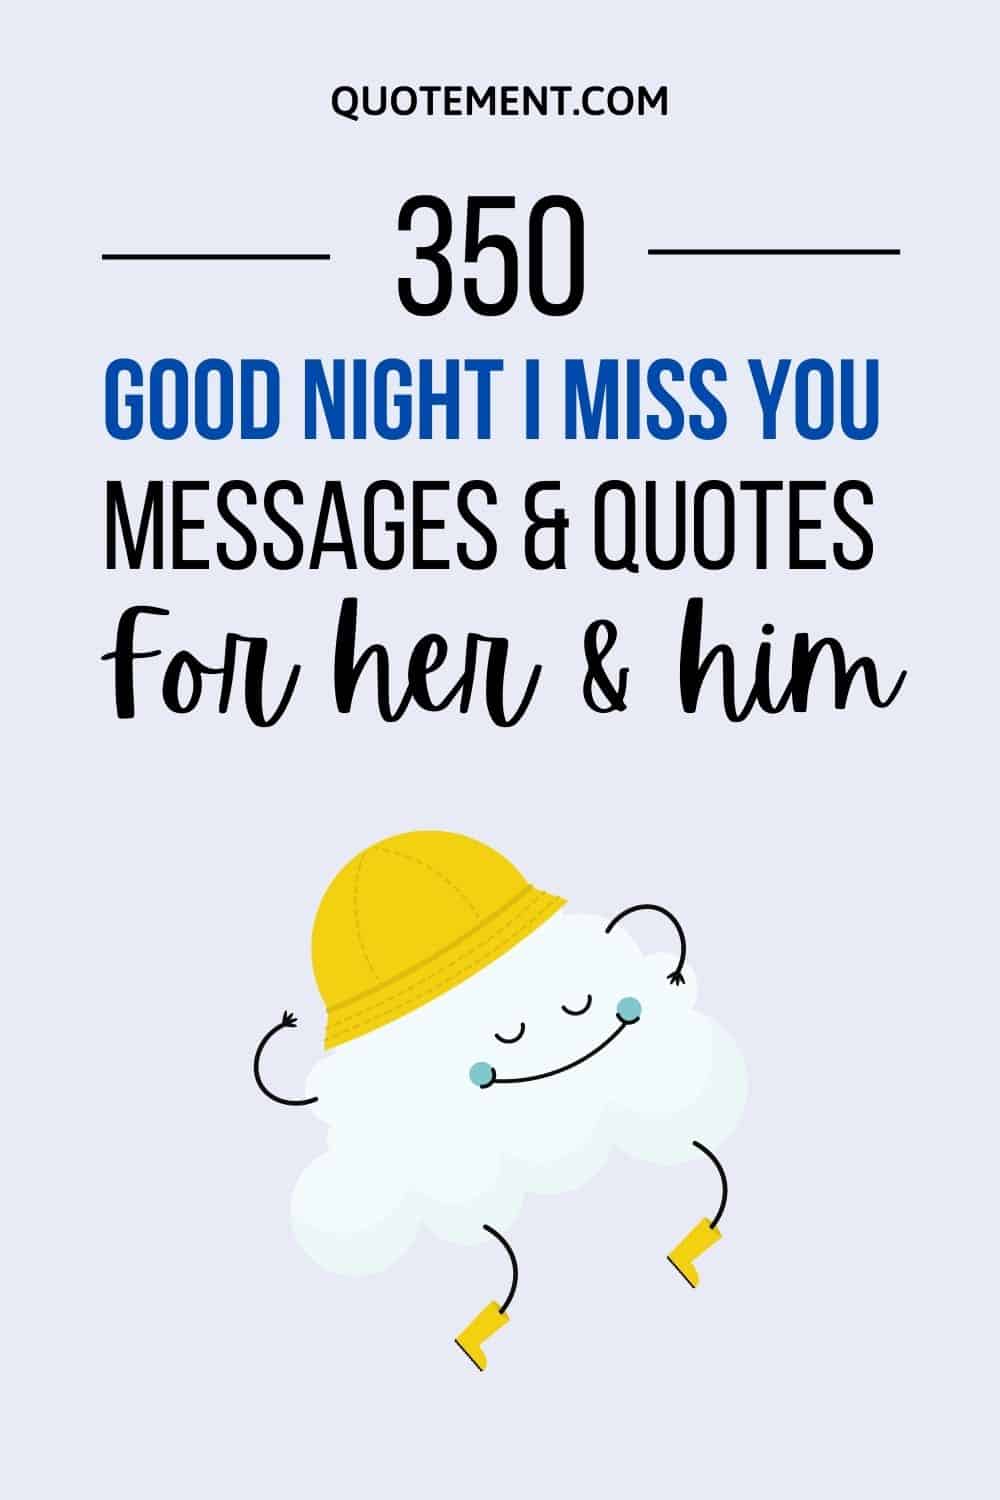 350 Good Night I Miss You Messages & Quotes For Her & Him